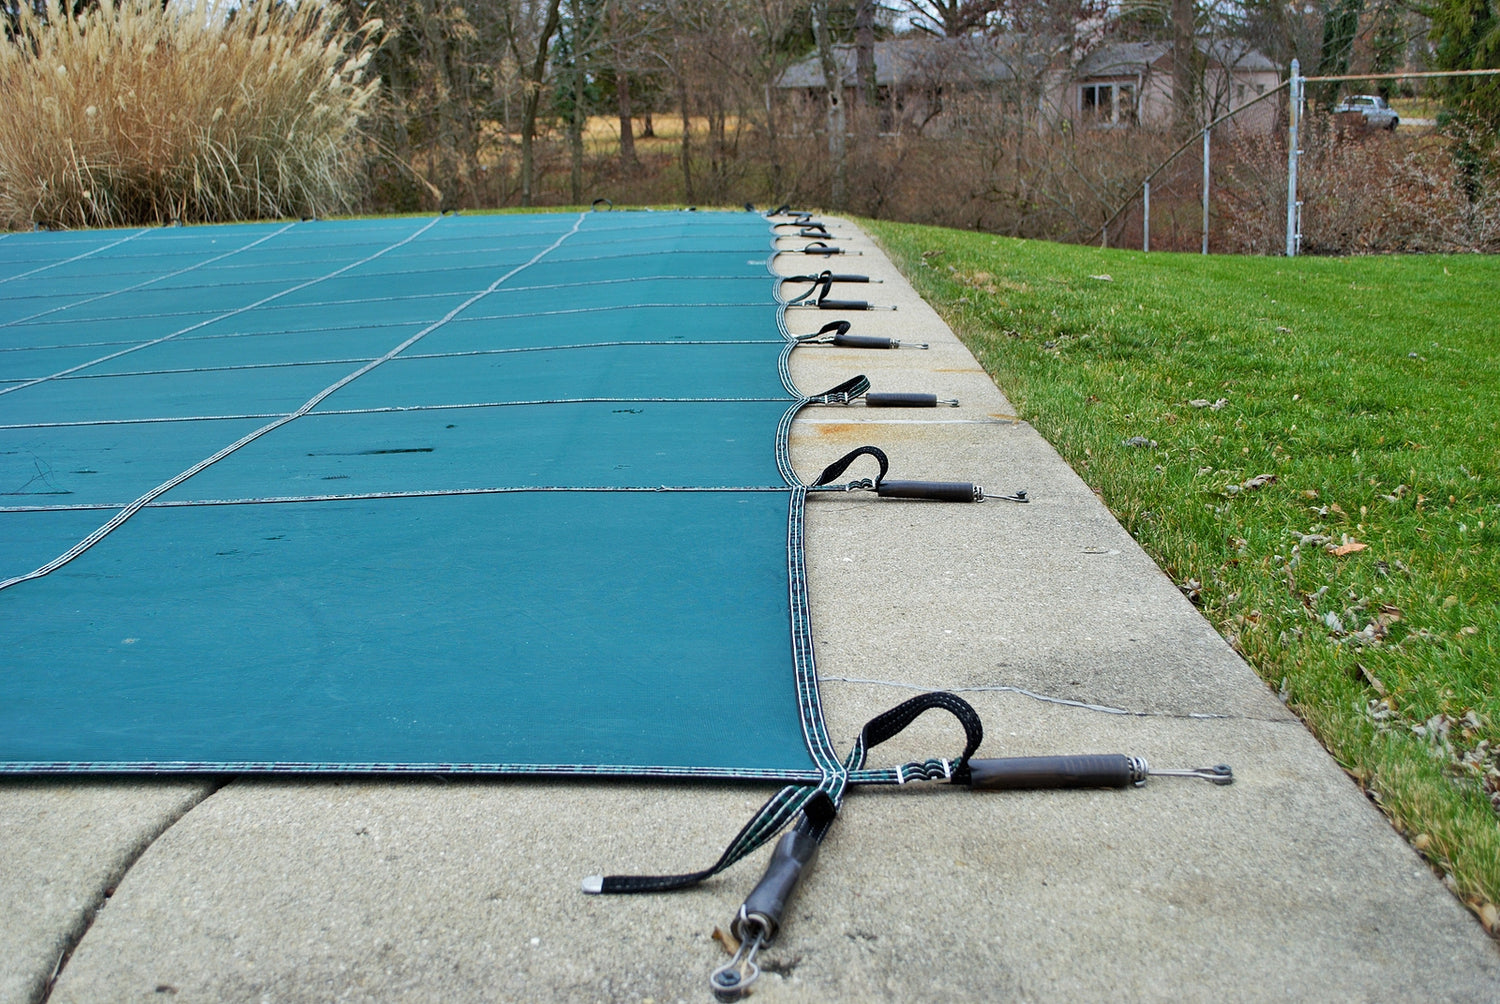 Why you should use a Solid or Mesh Inground Pool Cover?